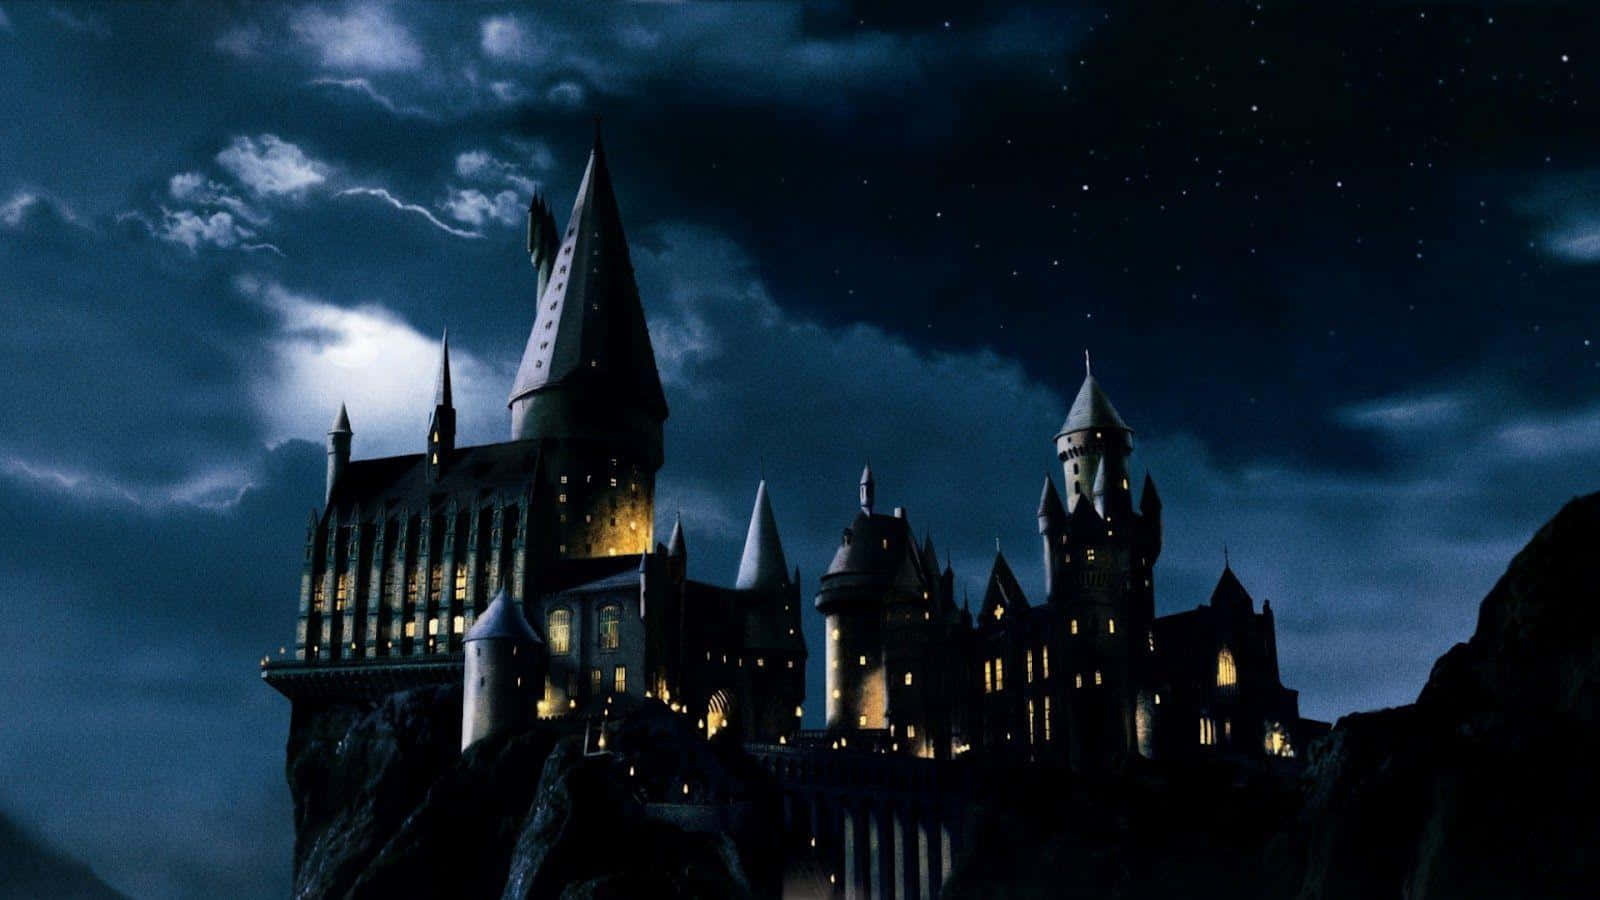 Explore the magical world of Harry Potter with Hogwarts Desktop! Wallpaper